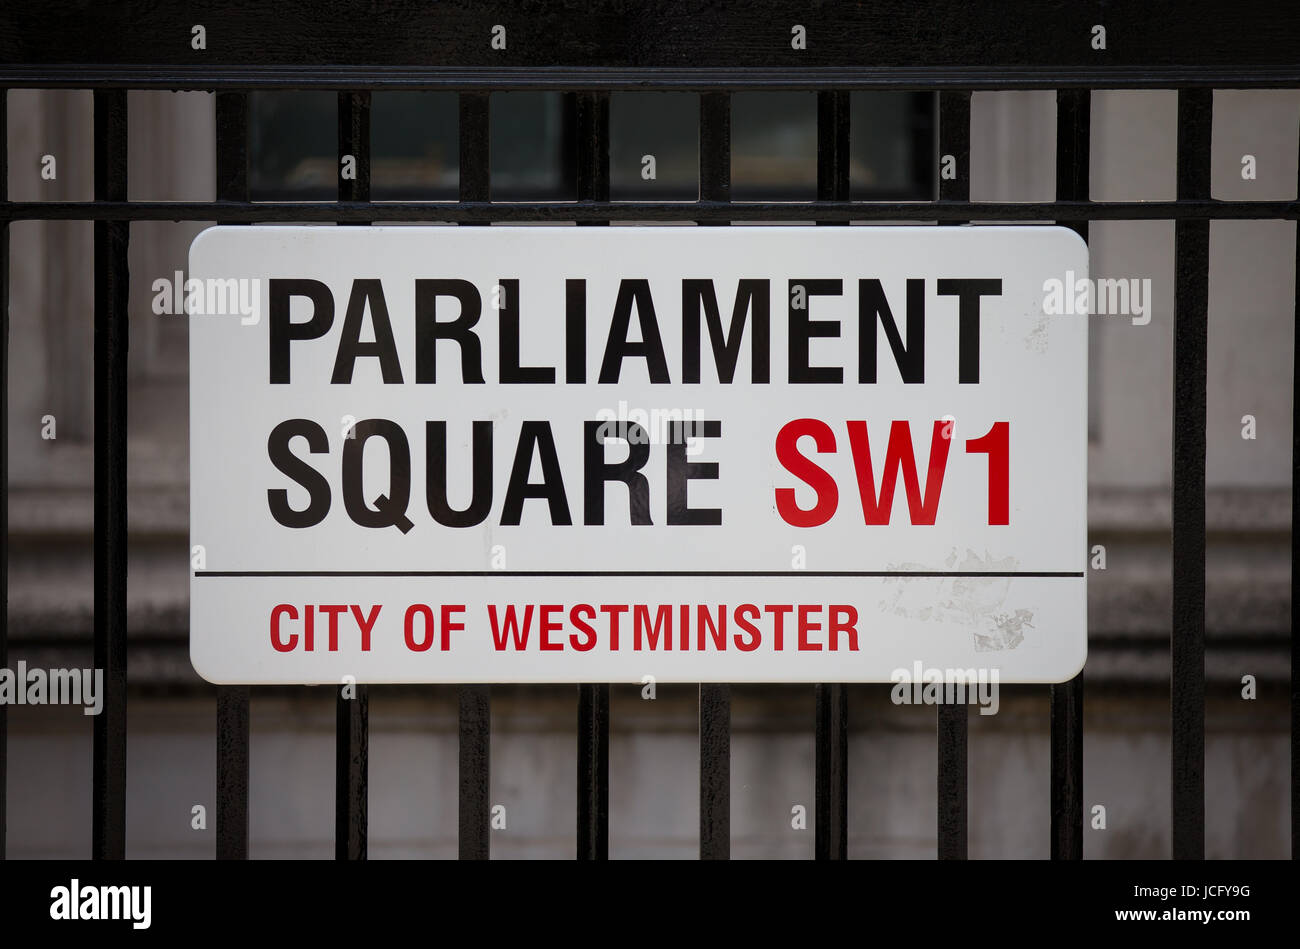 Parliament Square street sign on railings in the City of Westminster, London SW1 Stock Photo